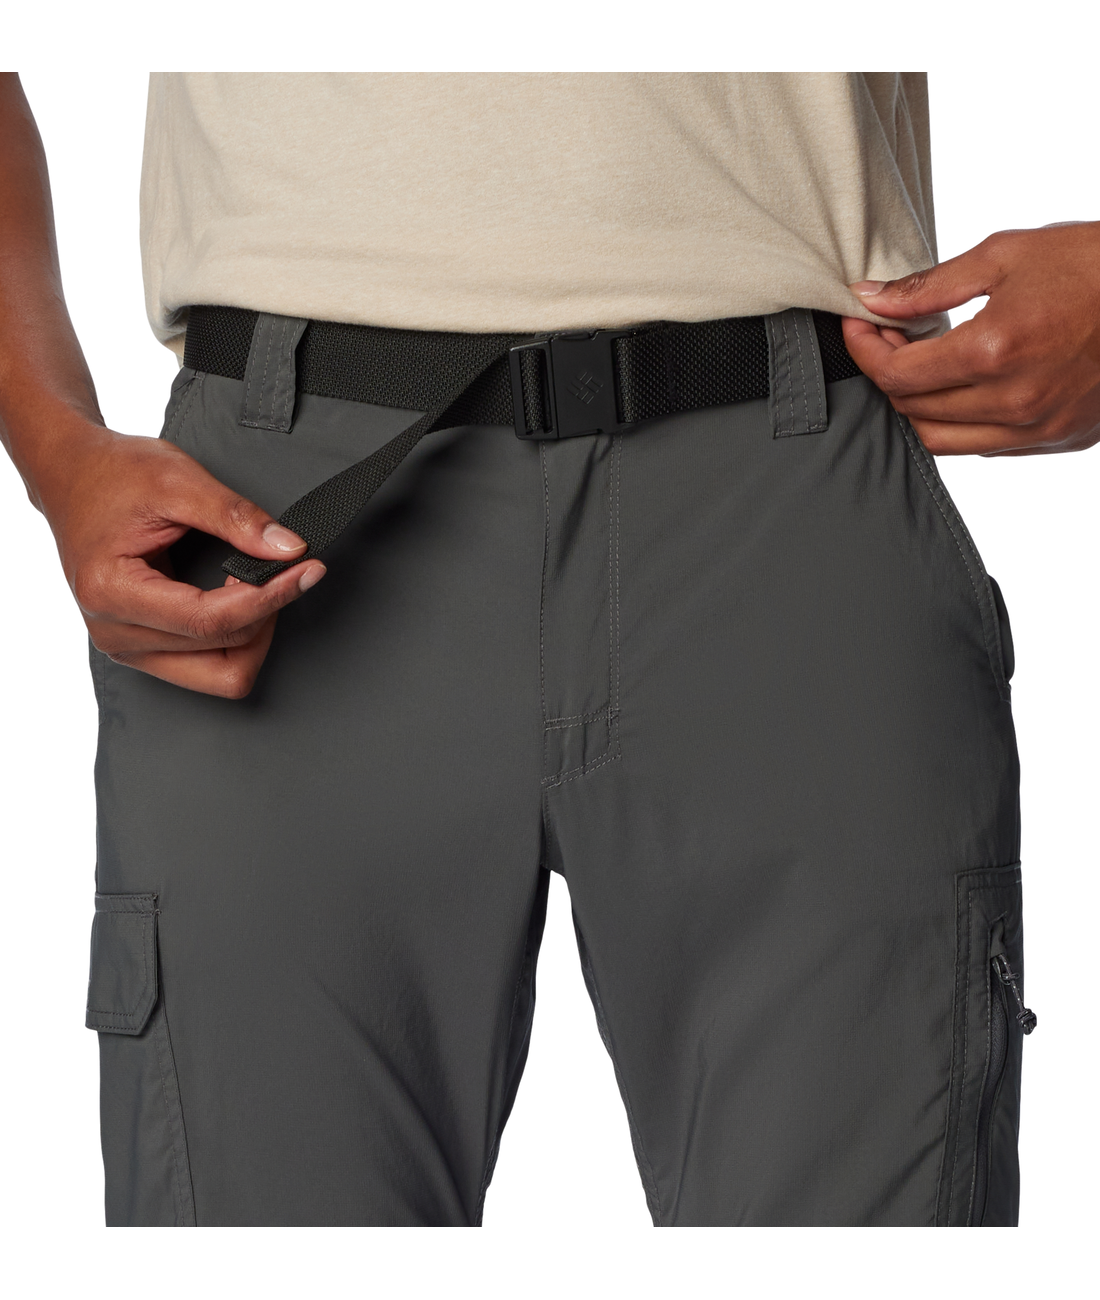 Silver Ridge Utility Convertible Pant - 30 Schrittlnge